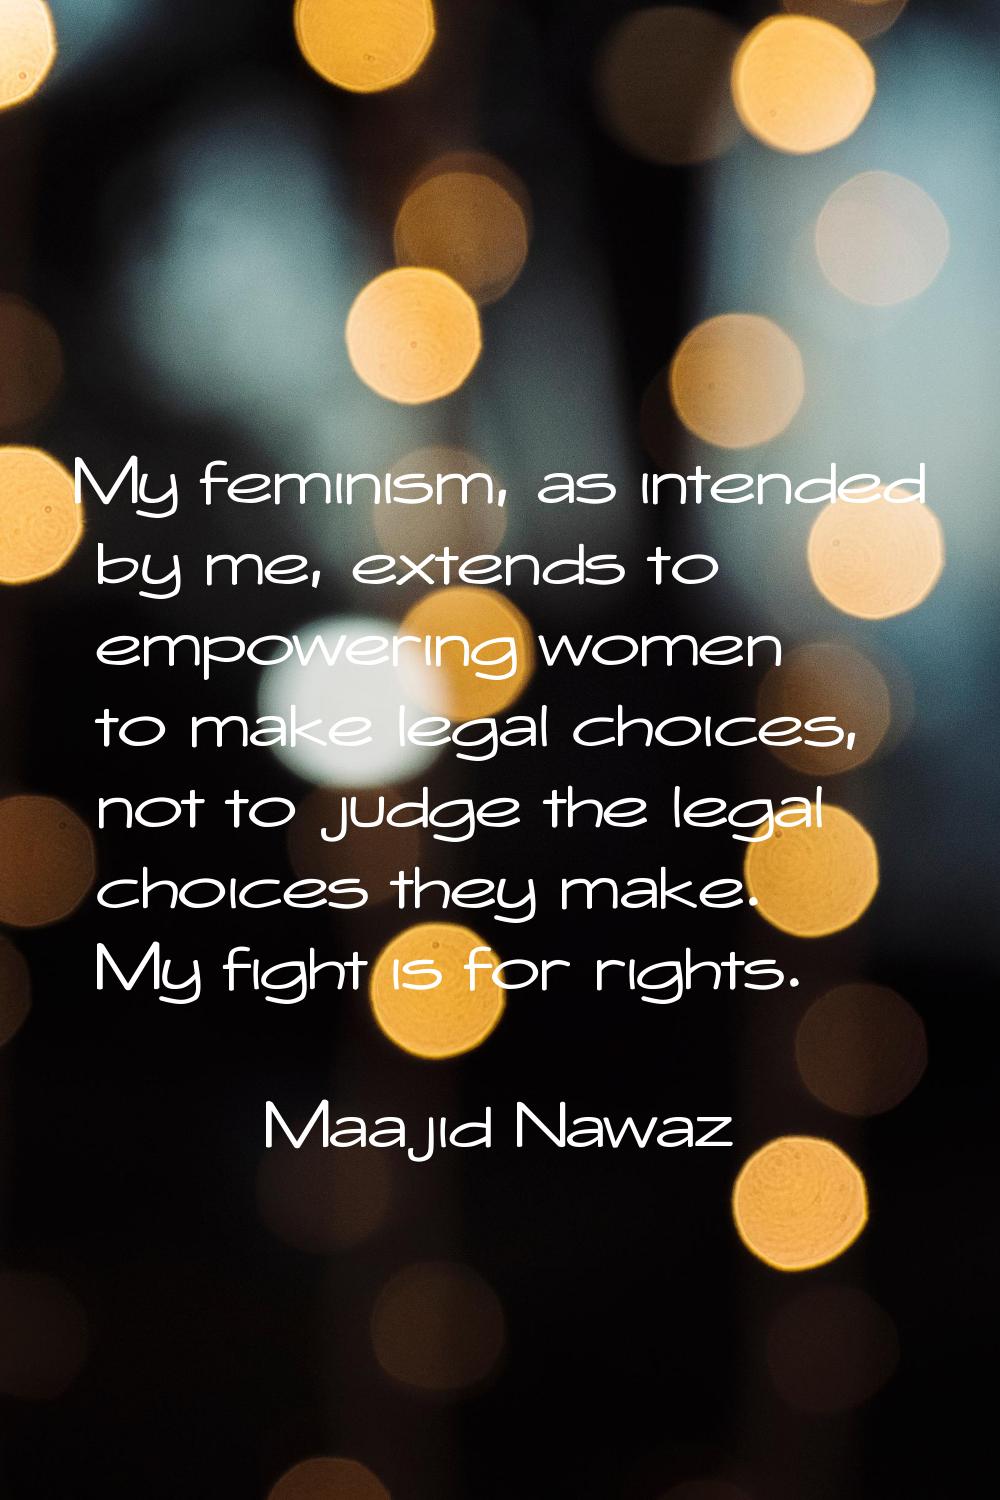 My feminism, as intended by me, extends to empowering women to make legal choices, not to judge the